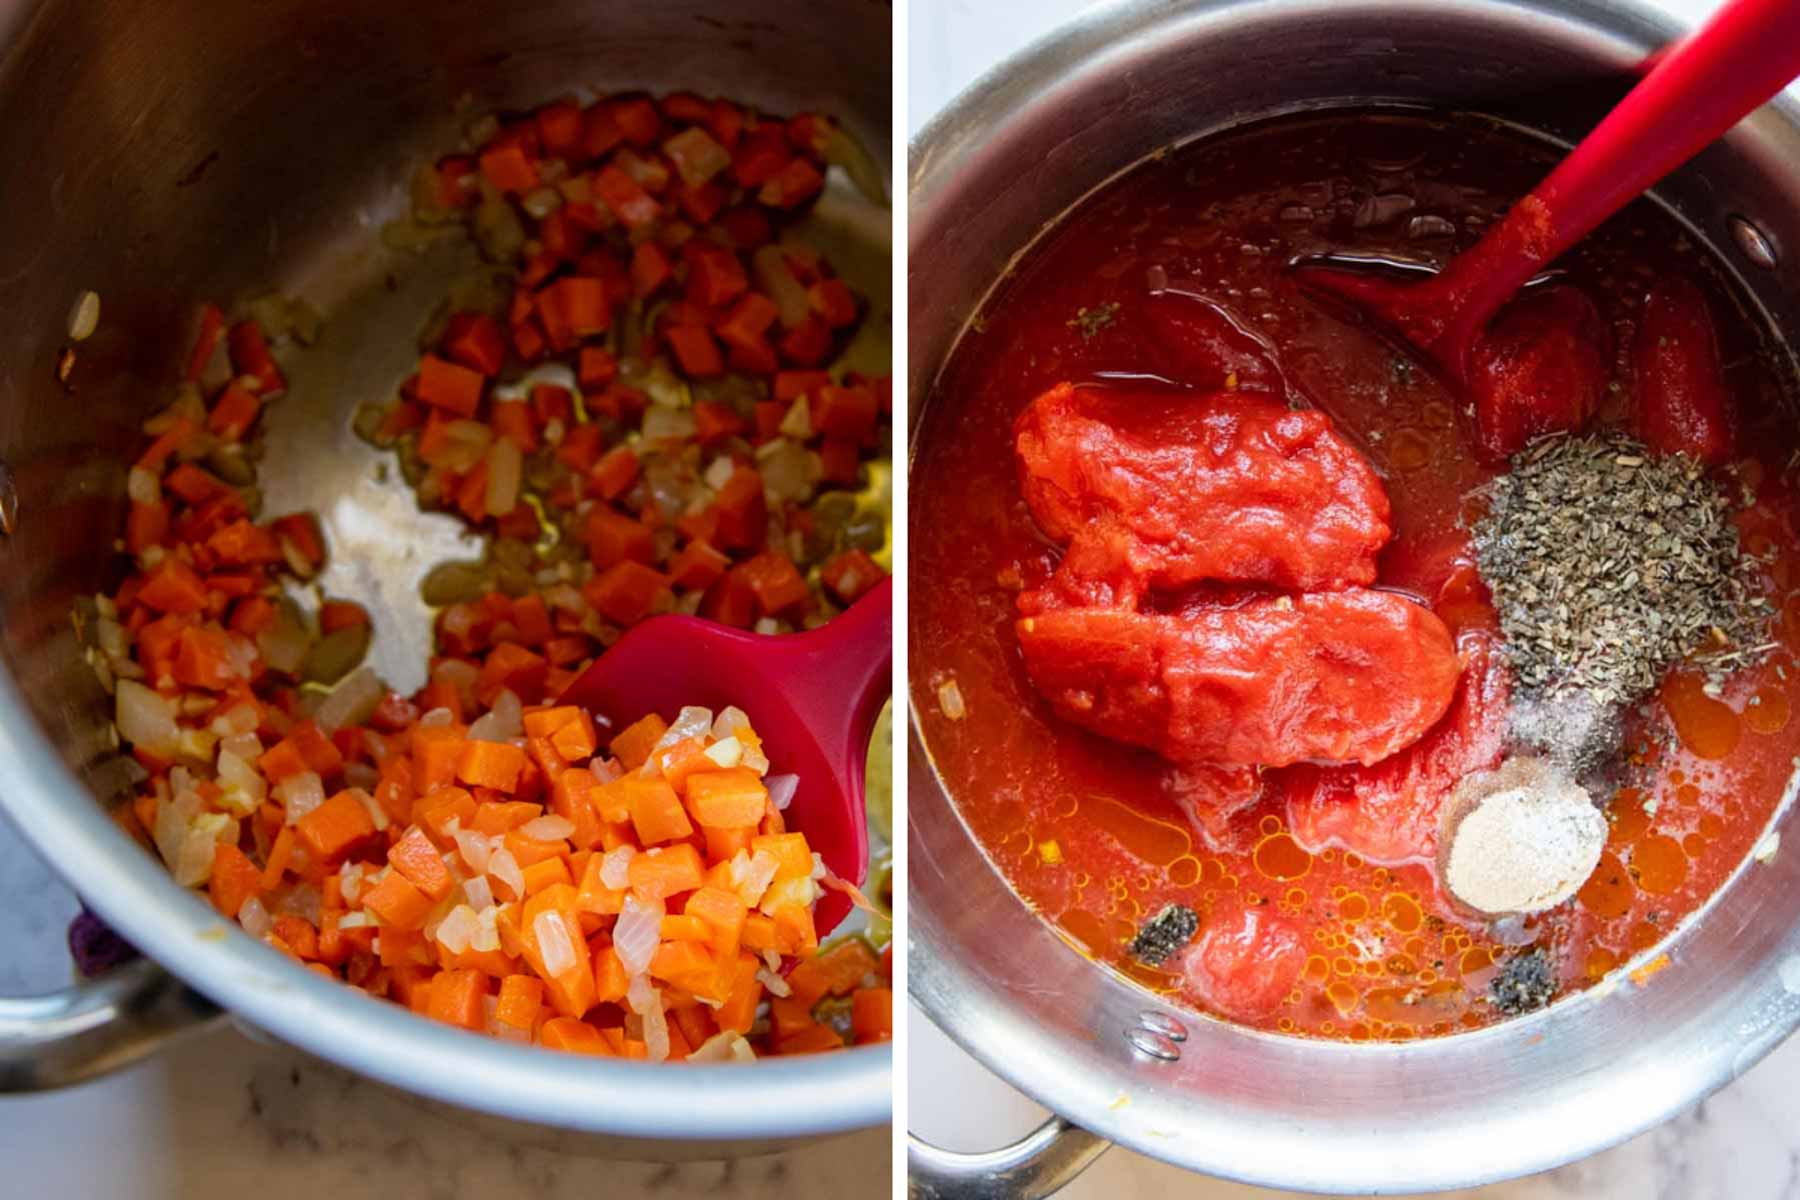 images showing how to make homemade gluten-free tomato soup.